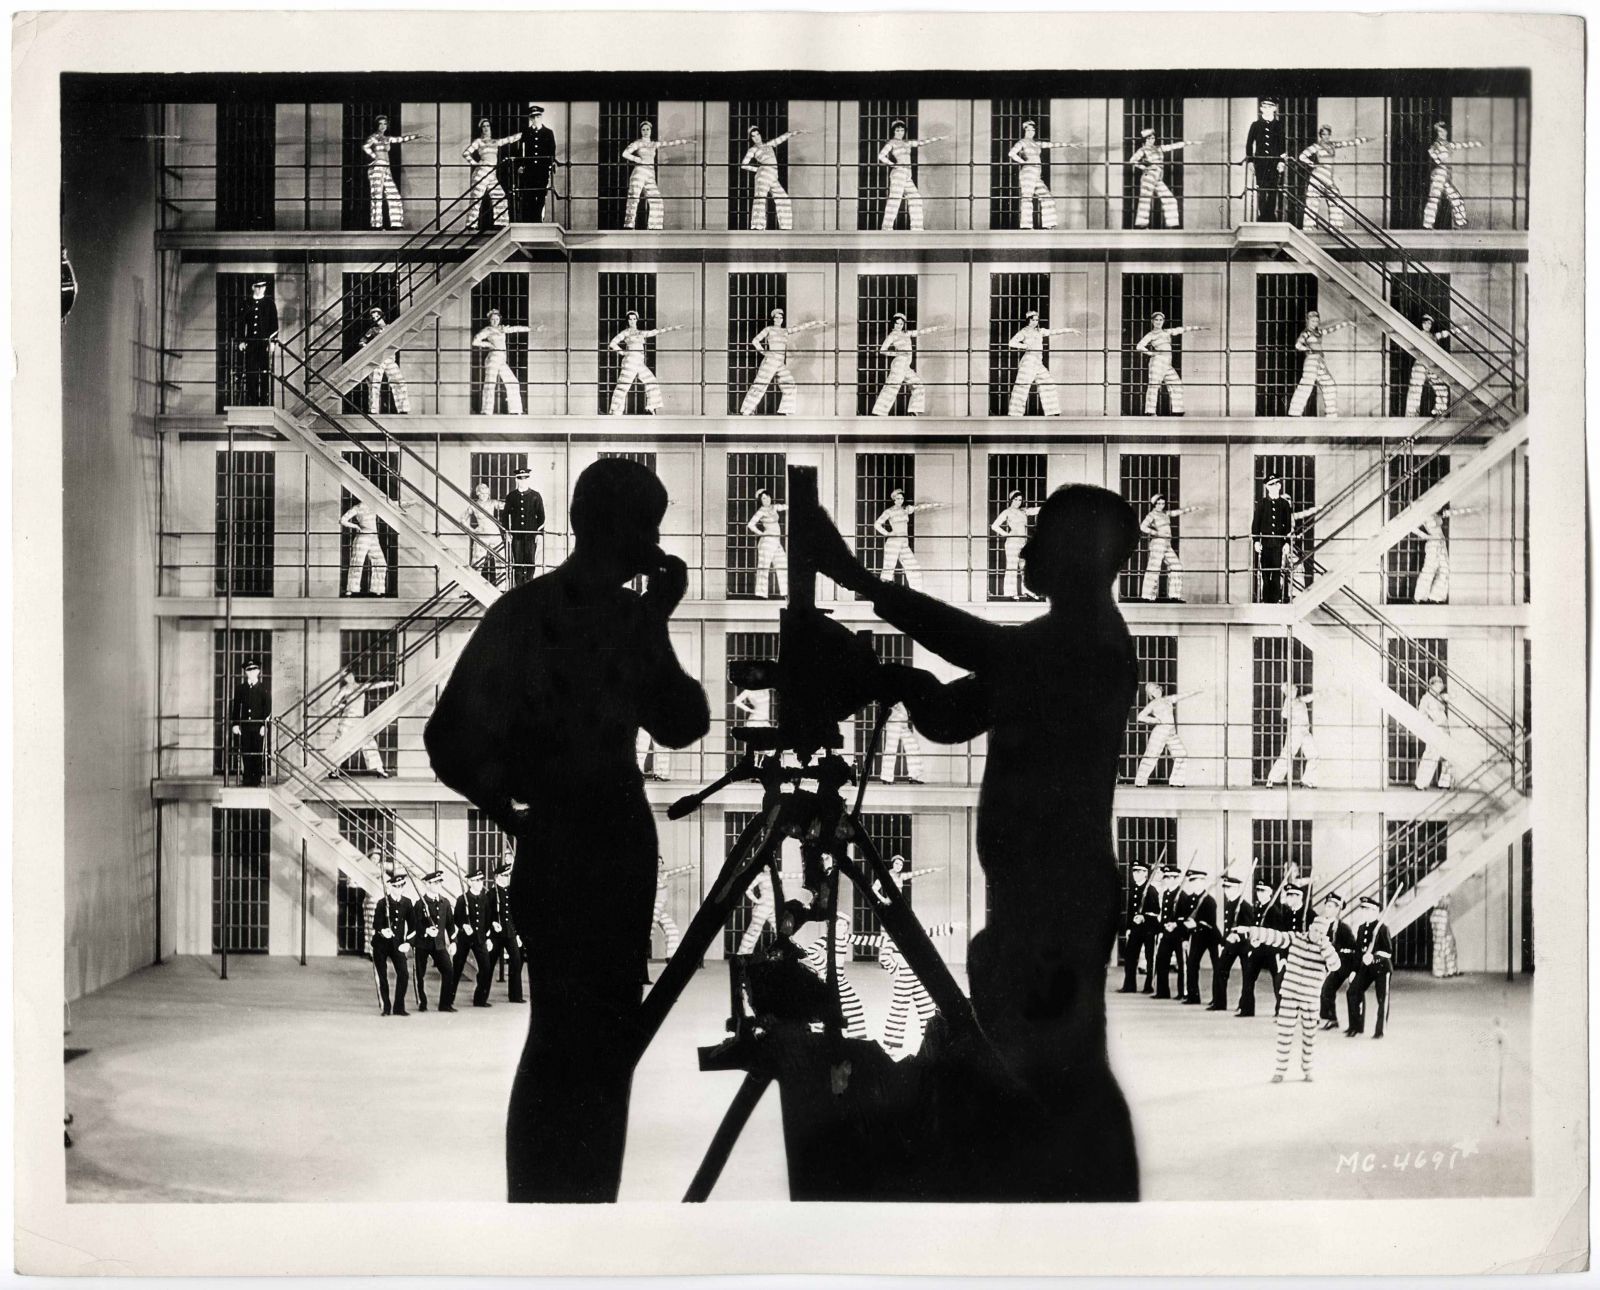 Black and white still from the film Broadway to Hollywood: silhouettes of two persons and a camera in front of a prison set with dancing inmates and guards